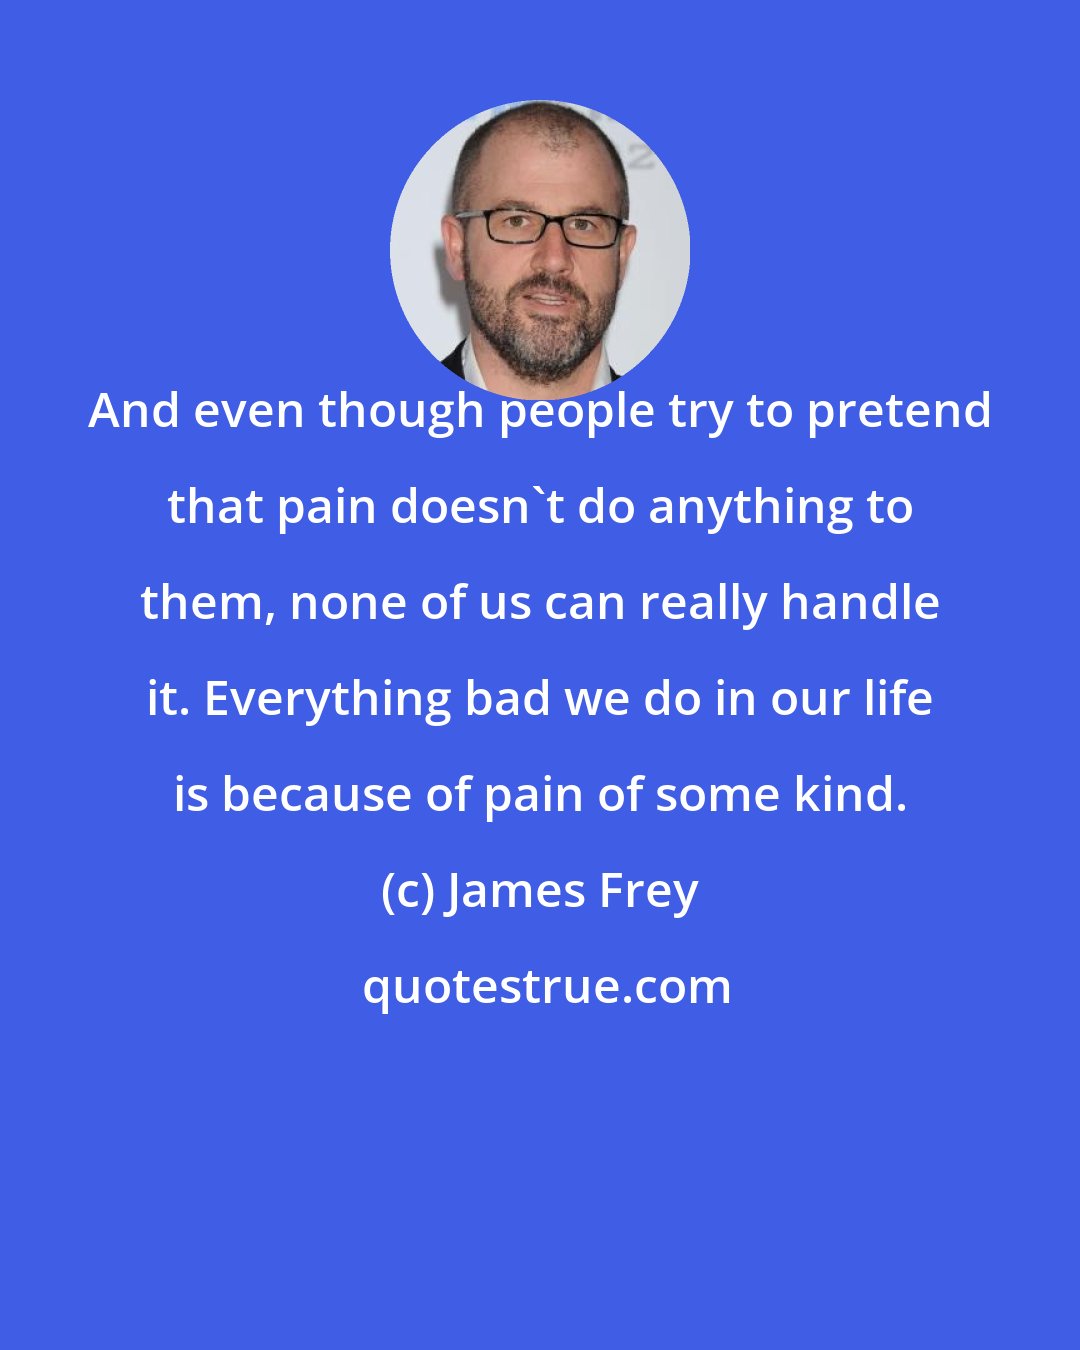 James Frey: And even though people try to pretend that pain doesn't do anything to them, none of us can really handle it. Everything bad we do in our life is because of pain of some kind.